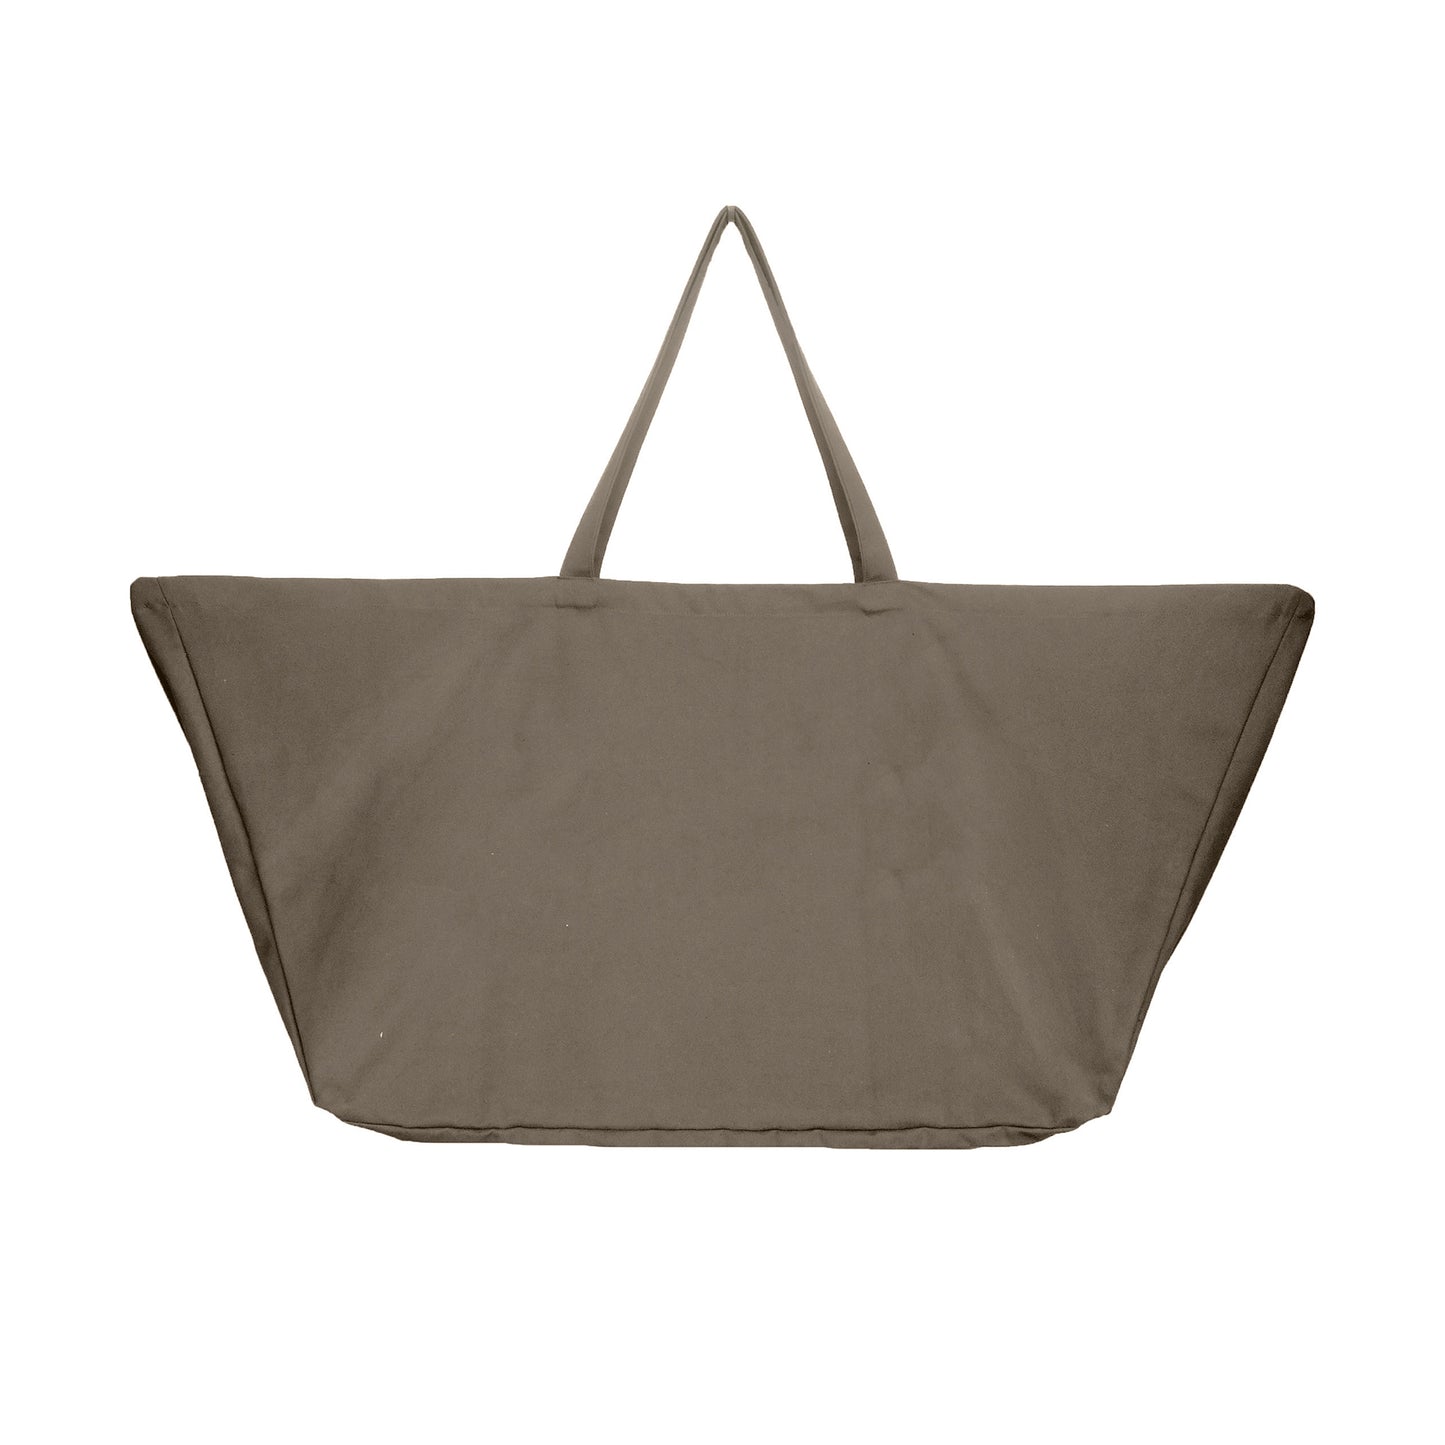 Oversized cotton canvas tote bag